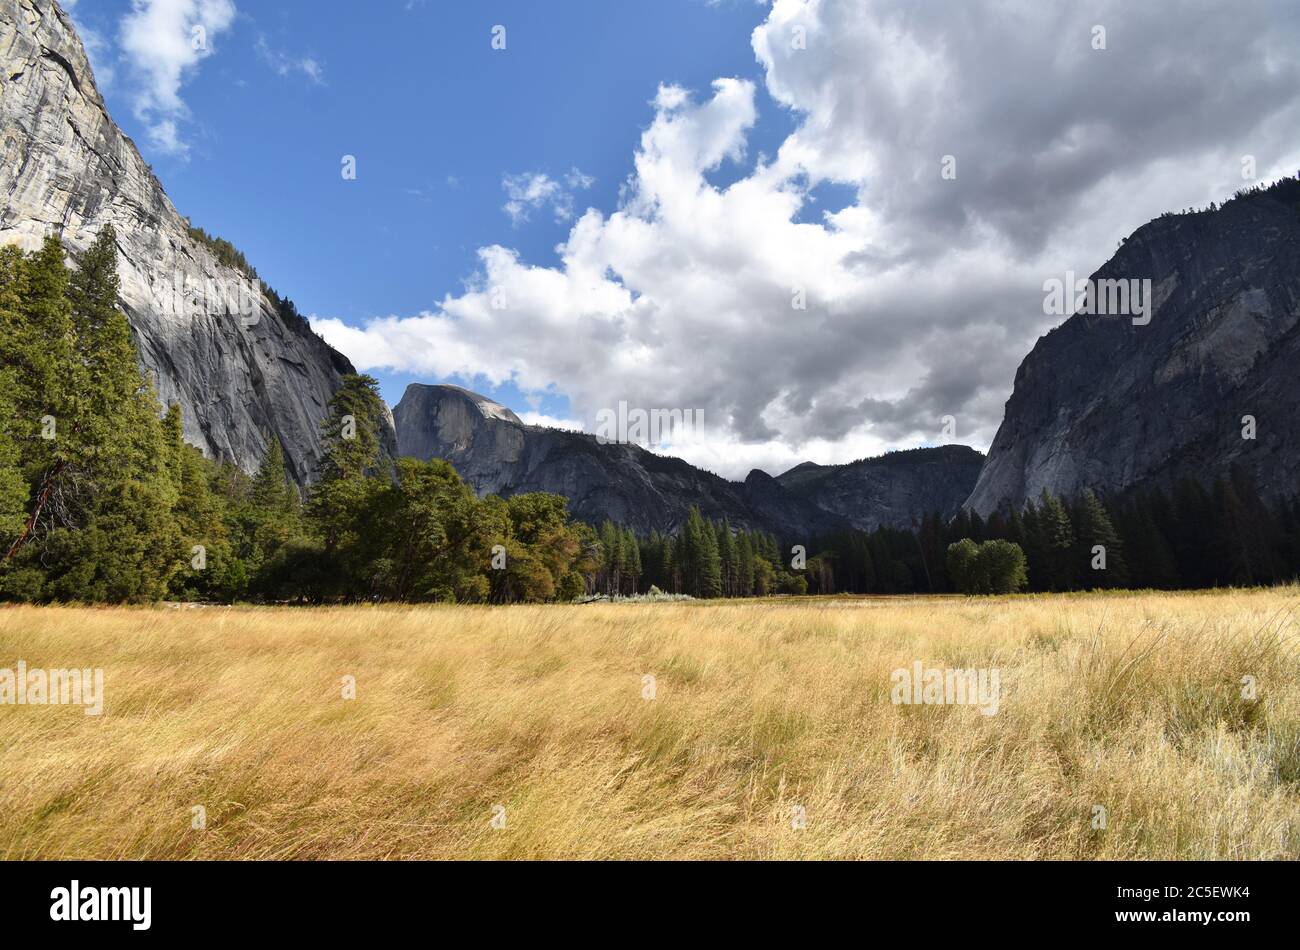 Meadow in Yosemite Valley looking towards Half Dome and surrounding rock formations in Fall / Autumn colours with yellow grass and green trees. Stock Photo